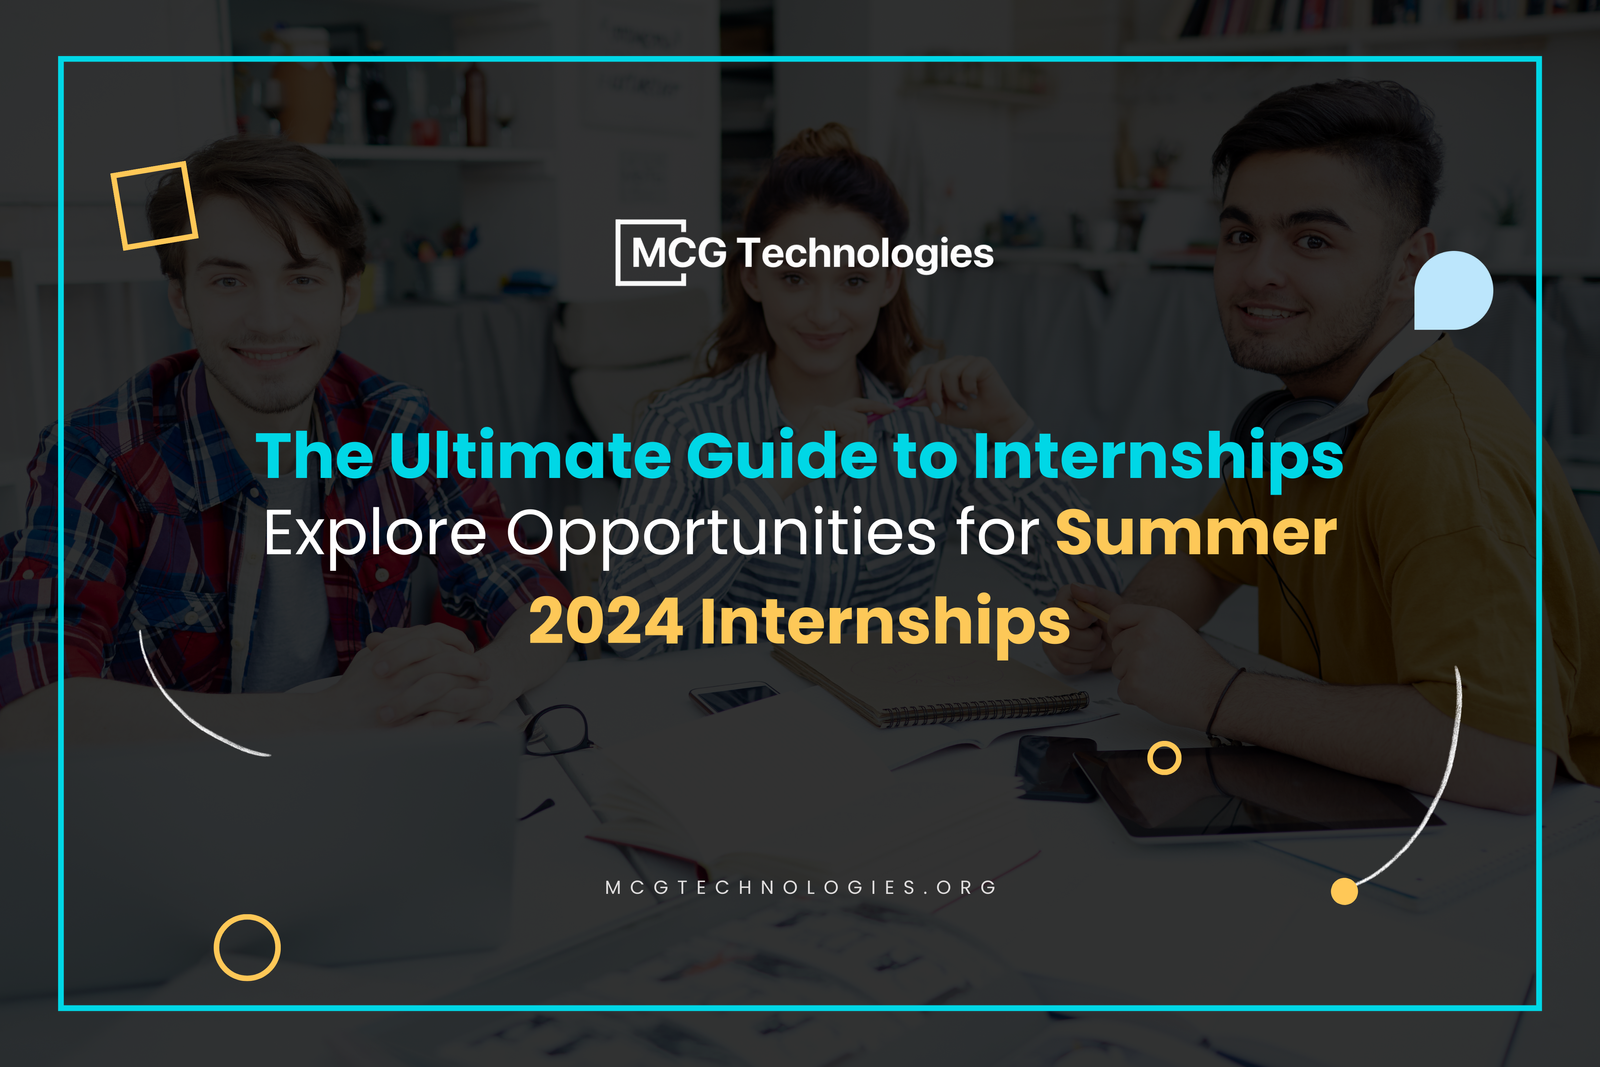 The Ultimate Guide to Internships: Explore Opportunities for Summer 2024 Internships